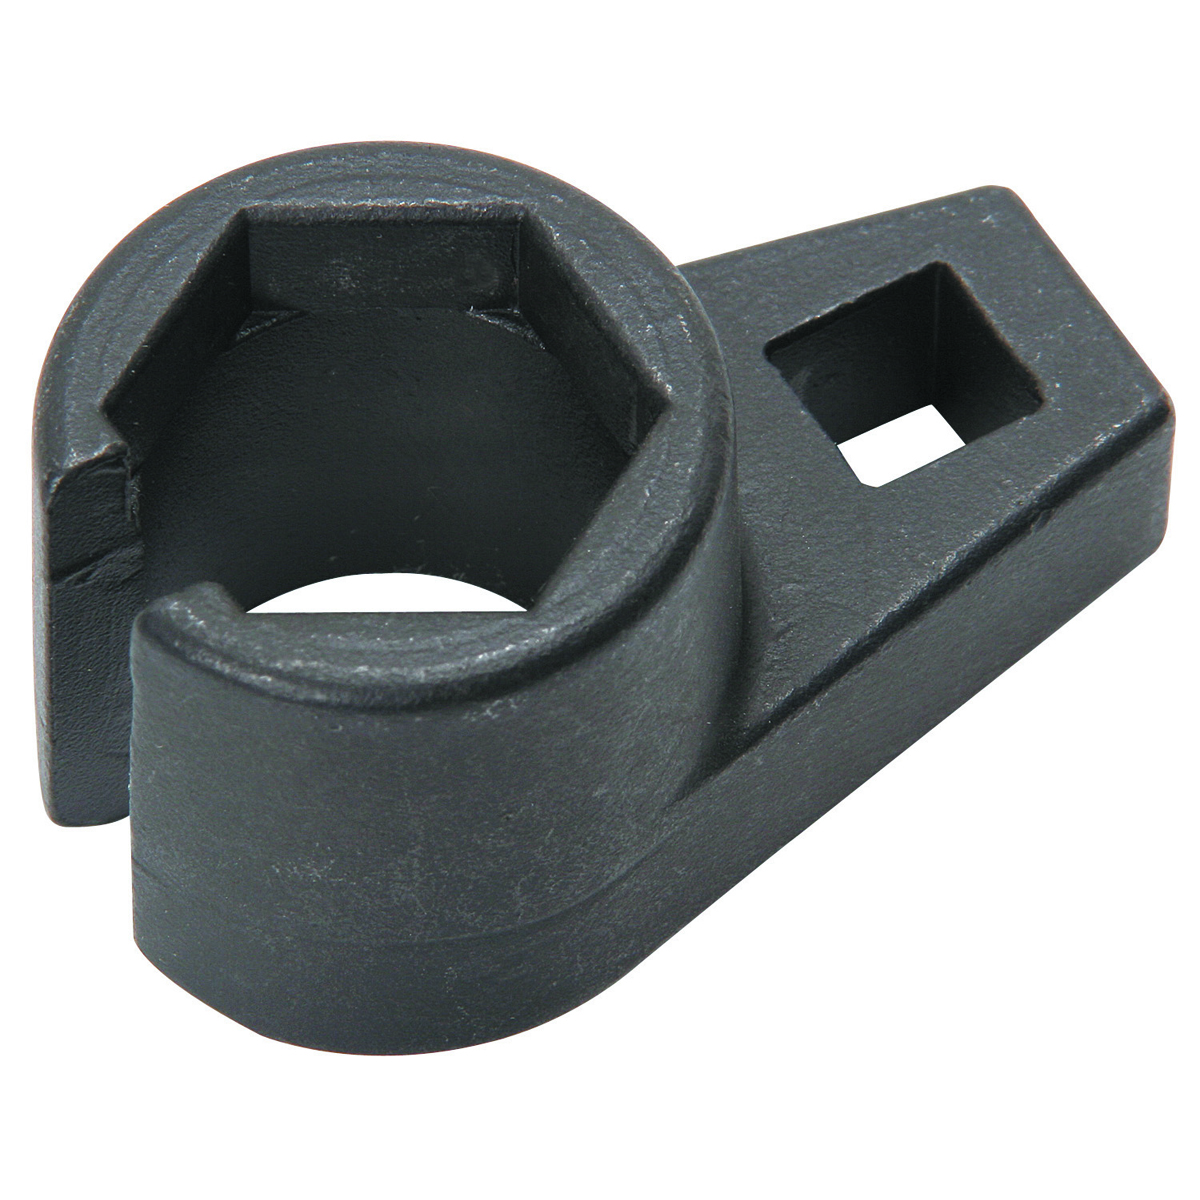 PITTSBURGH AUTOMOTIVE 3/8 in. Offset Oxygen Sensor Wrench - Item 97177